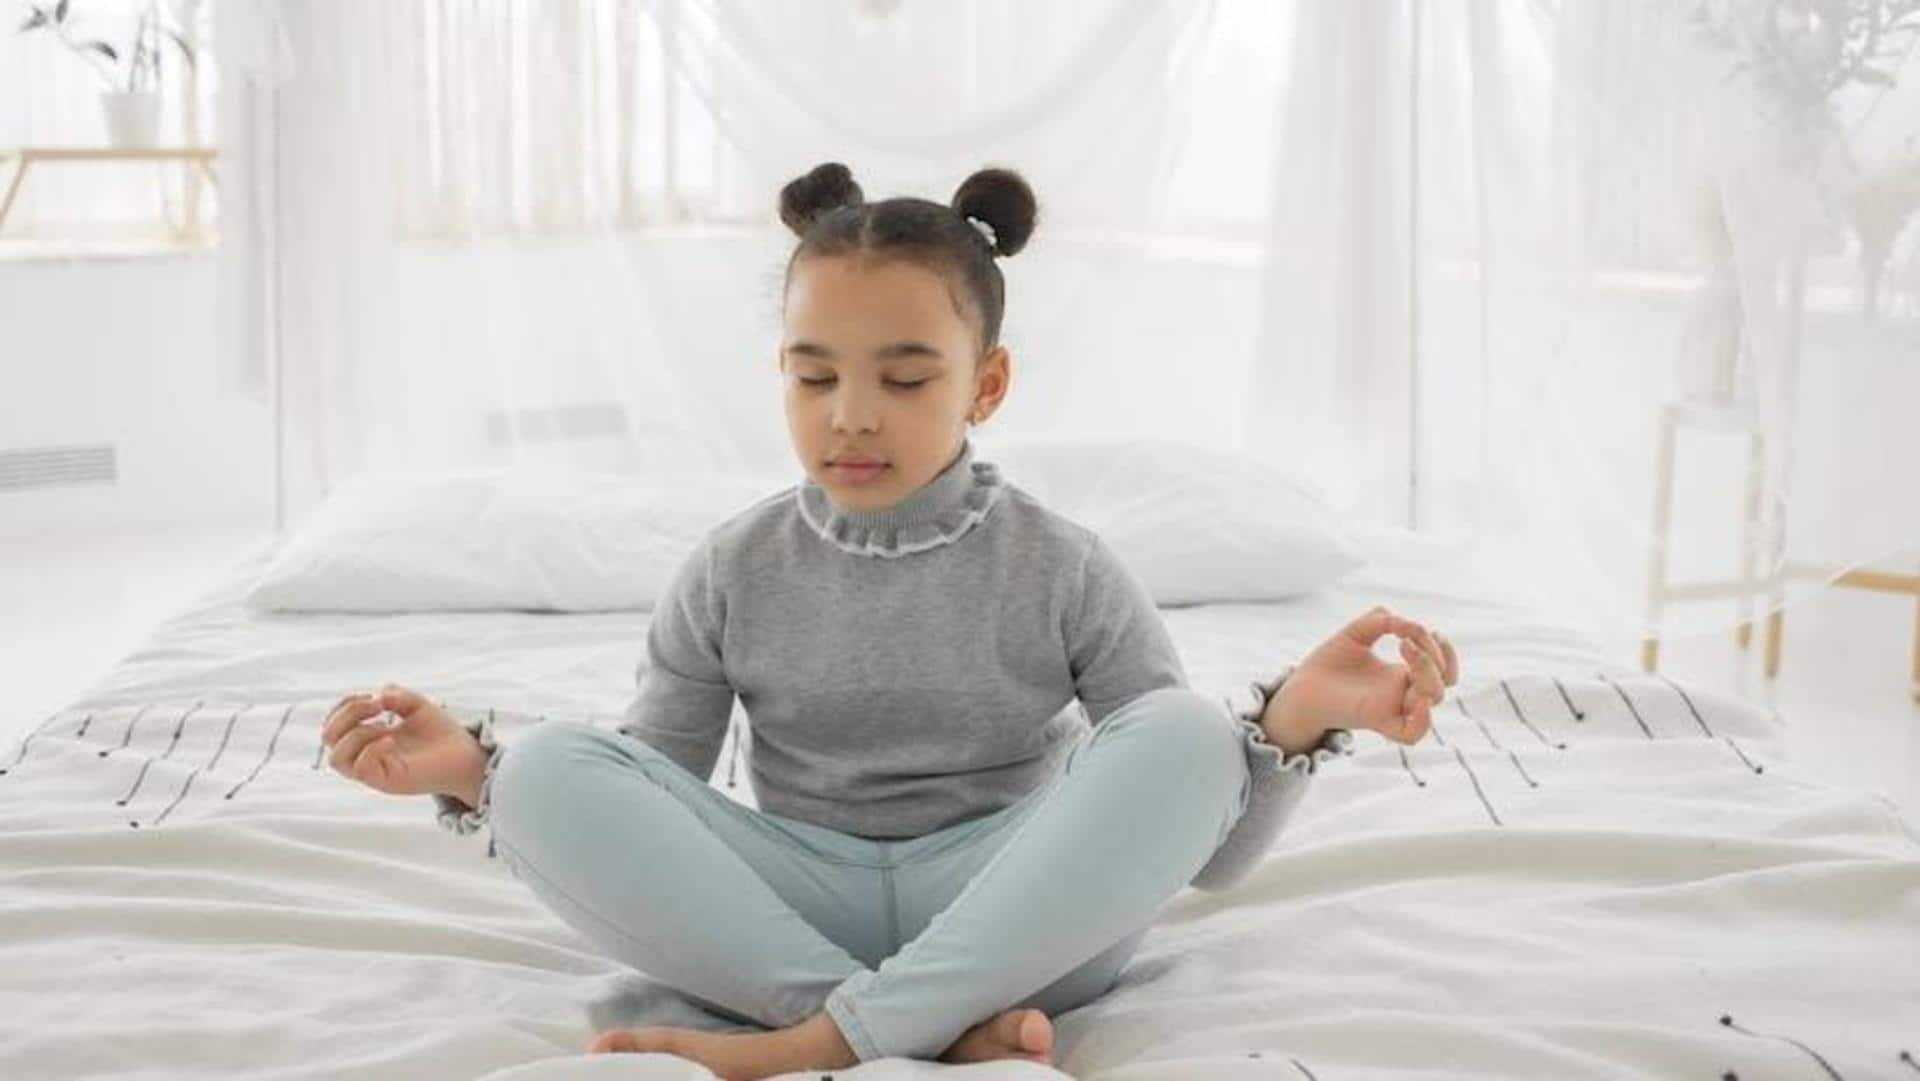 Why parents should introduce meditation during formative years of children